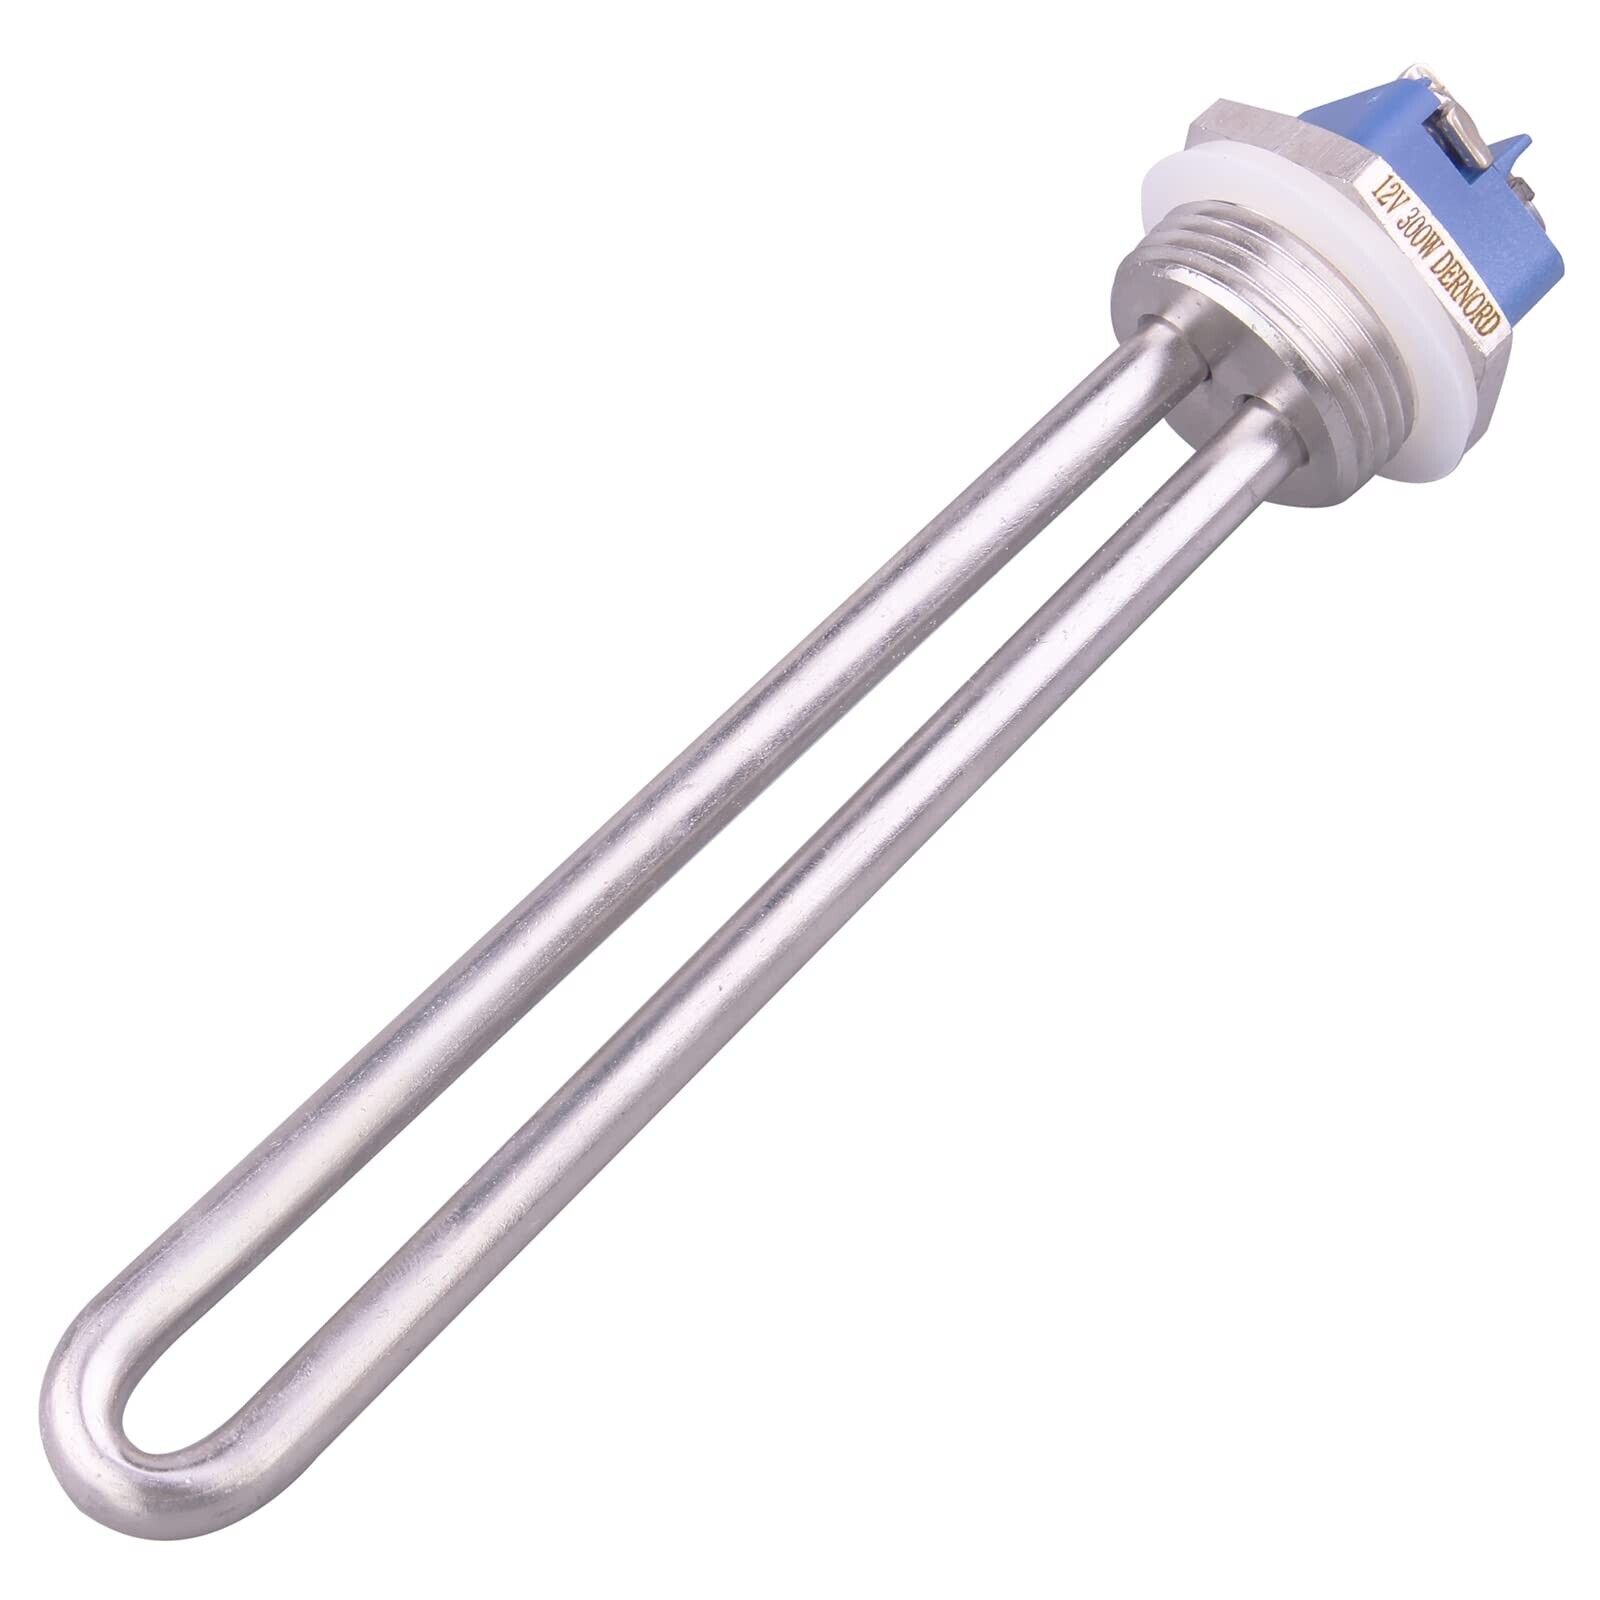 DERNORD 12V 300W DC Immersion Heater Submersible Water Heater Element Stainle...